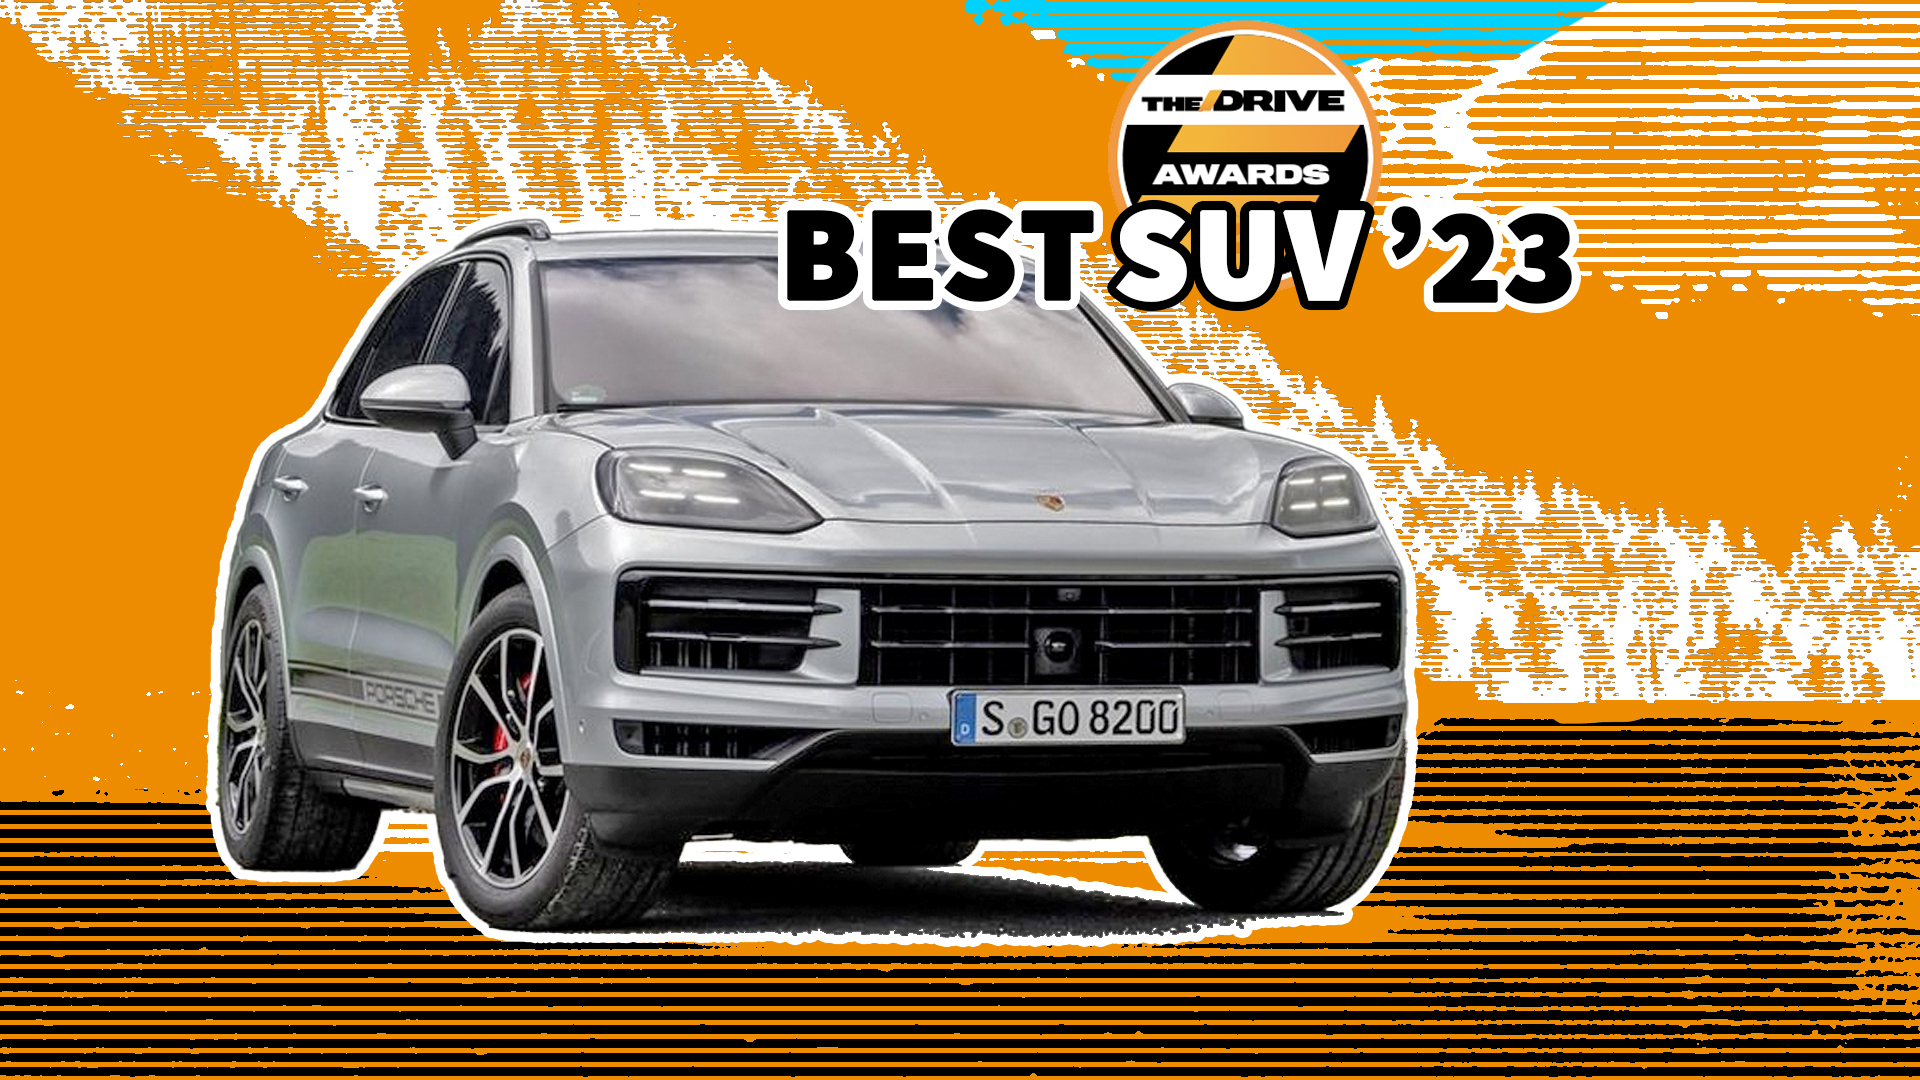 The Drive’s Best SUV of 2023 Is the Porsche Cayenne